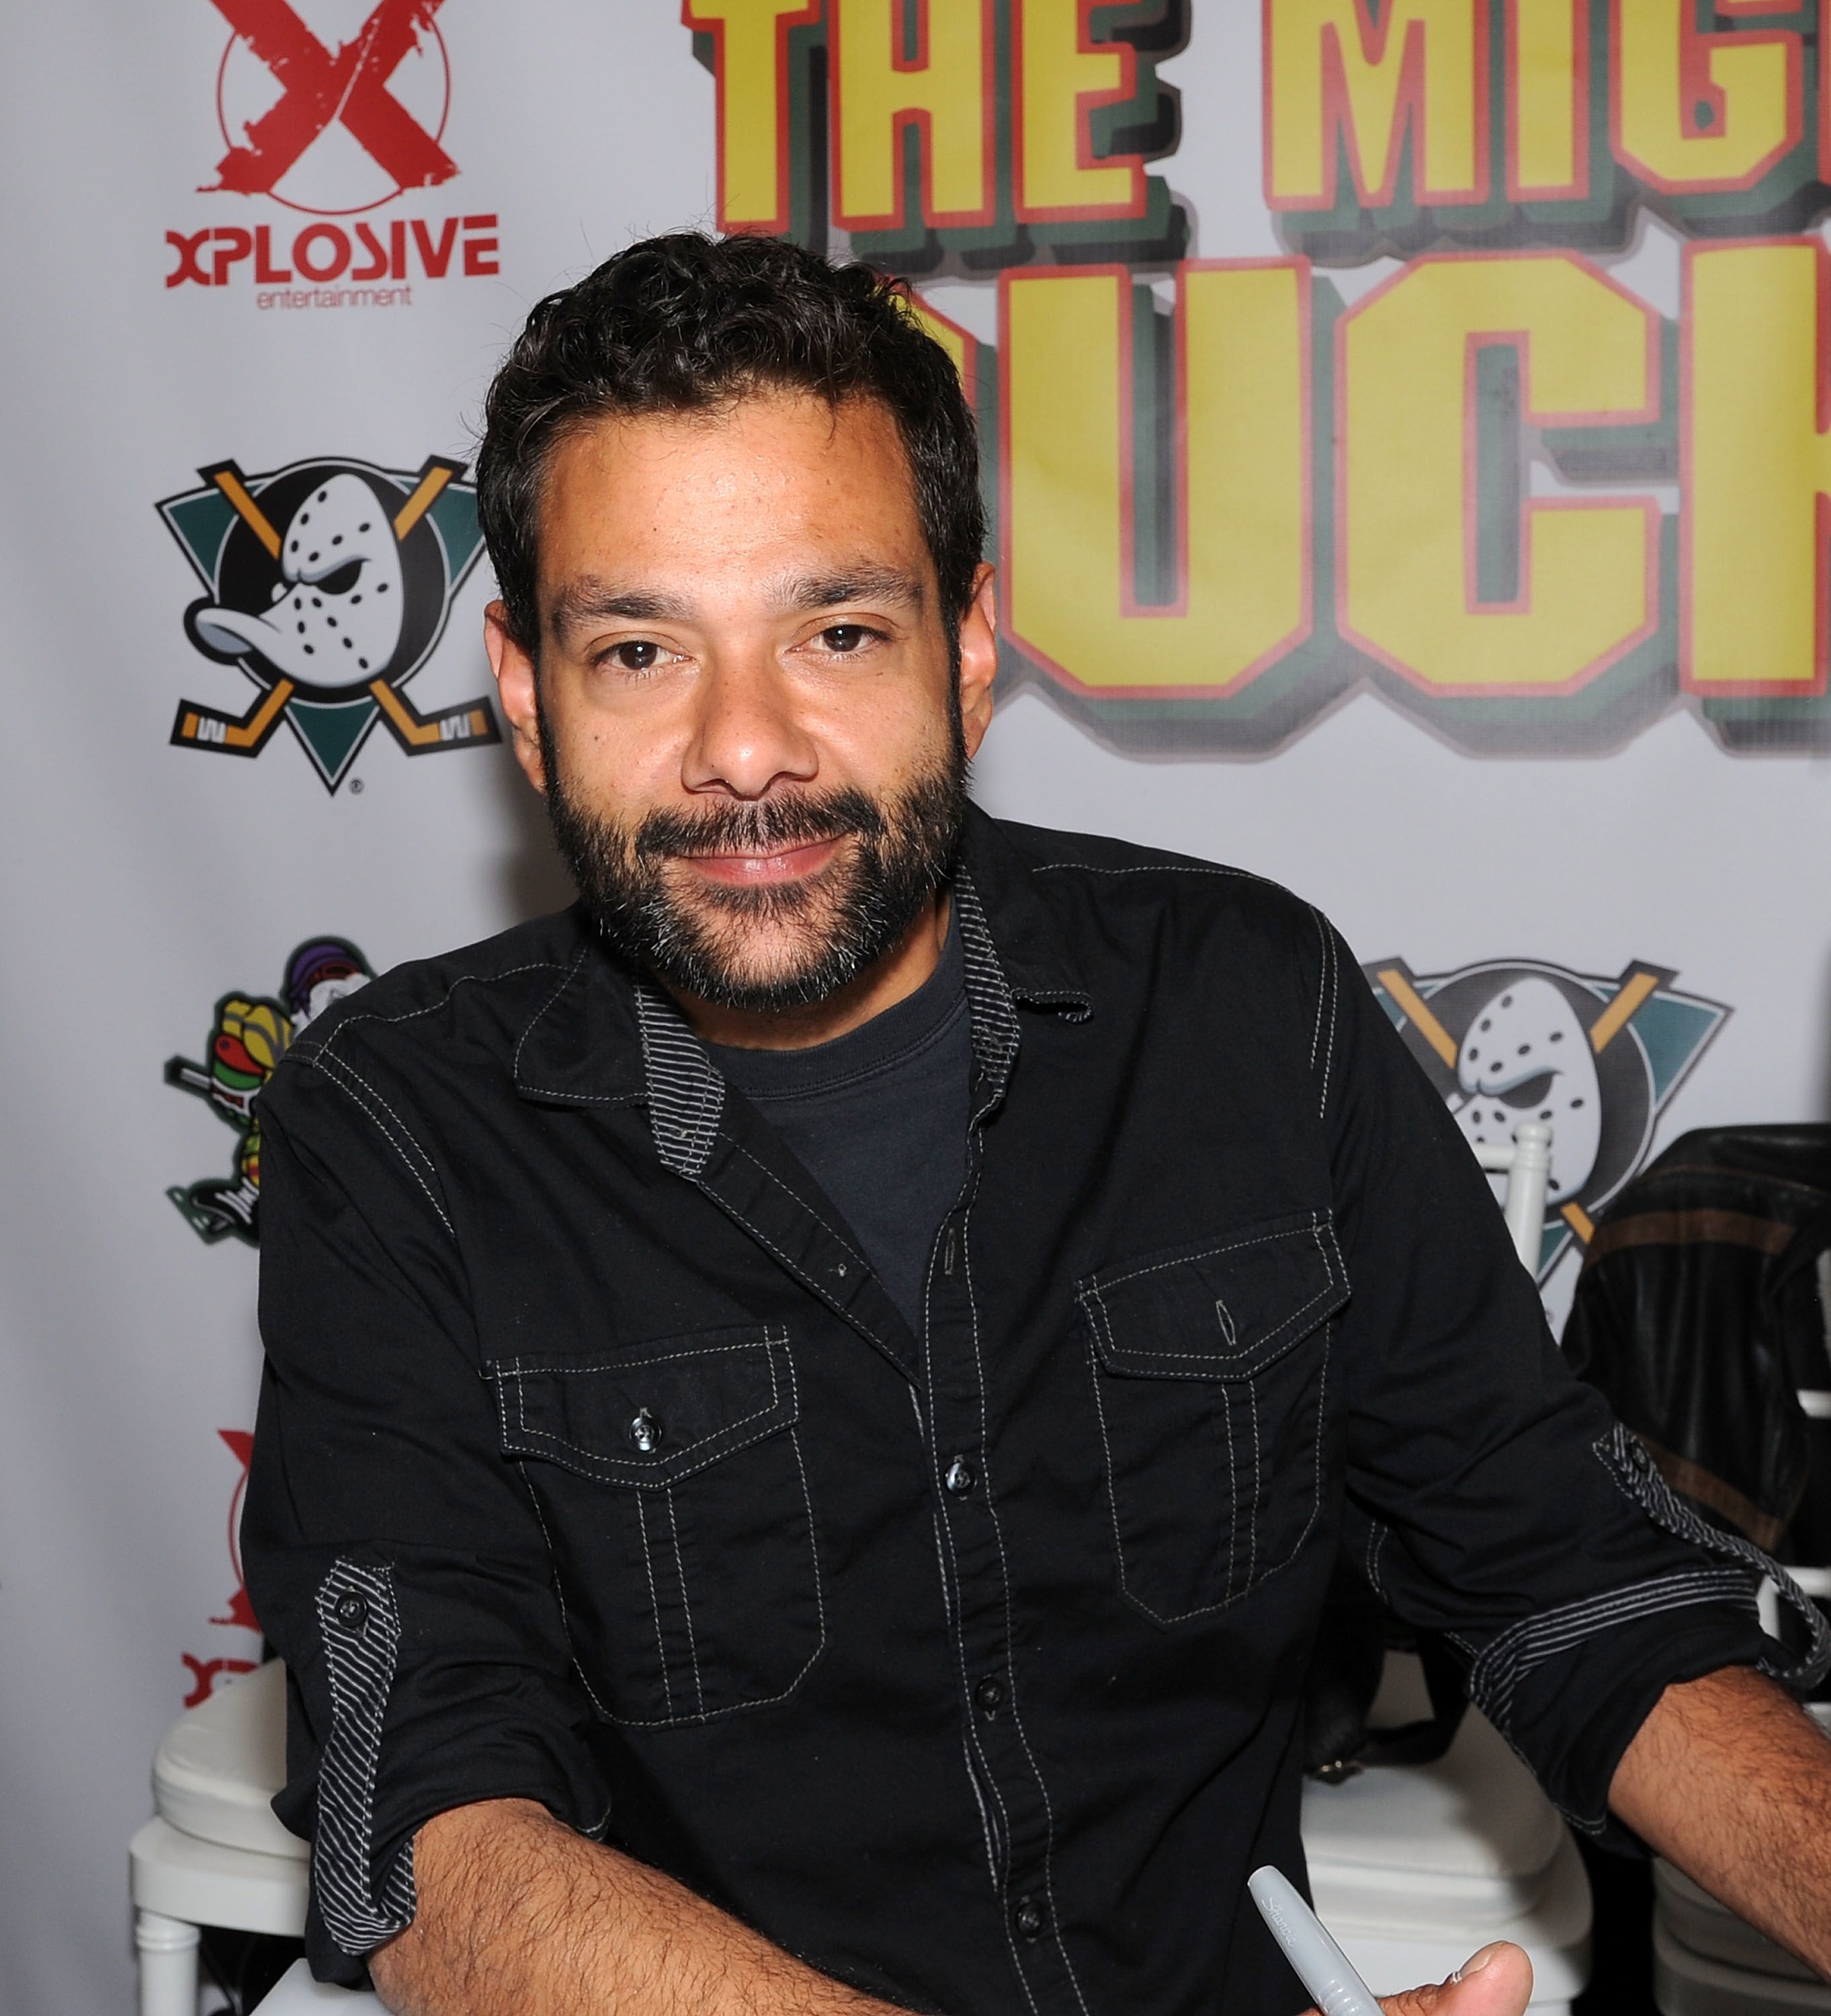 Shaun Weiss, the actor best known for playing Greg Goldberg in The